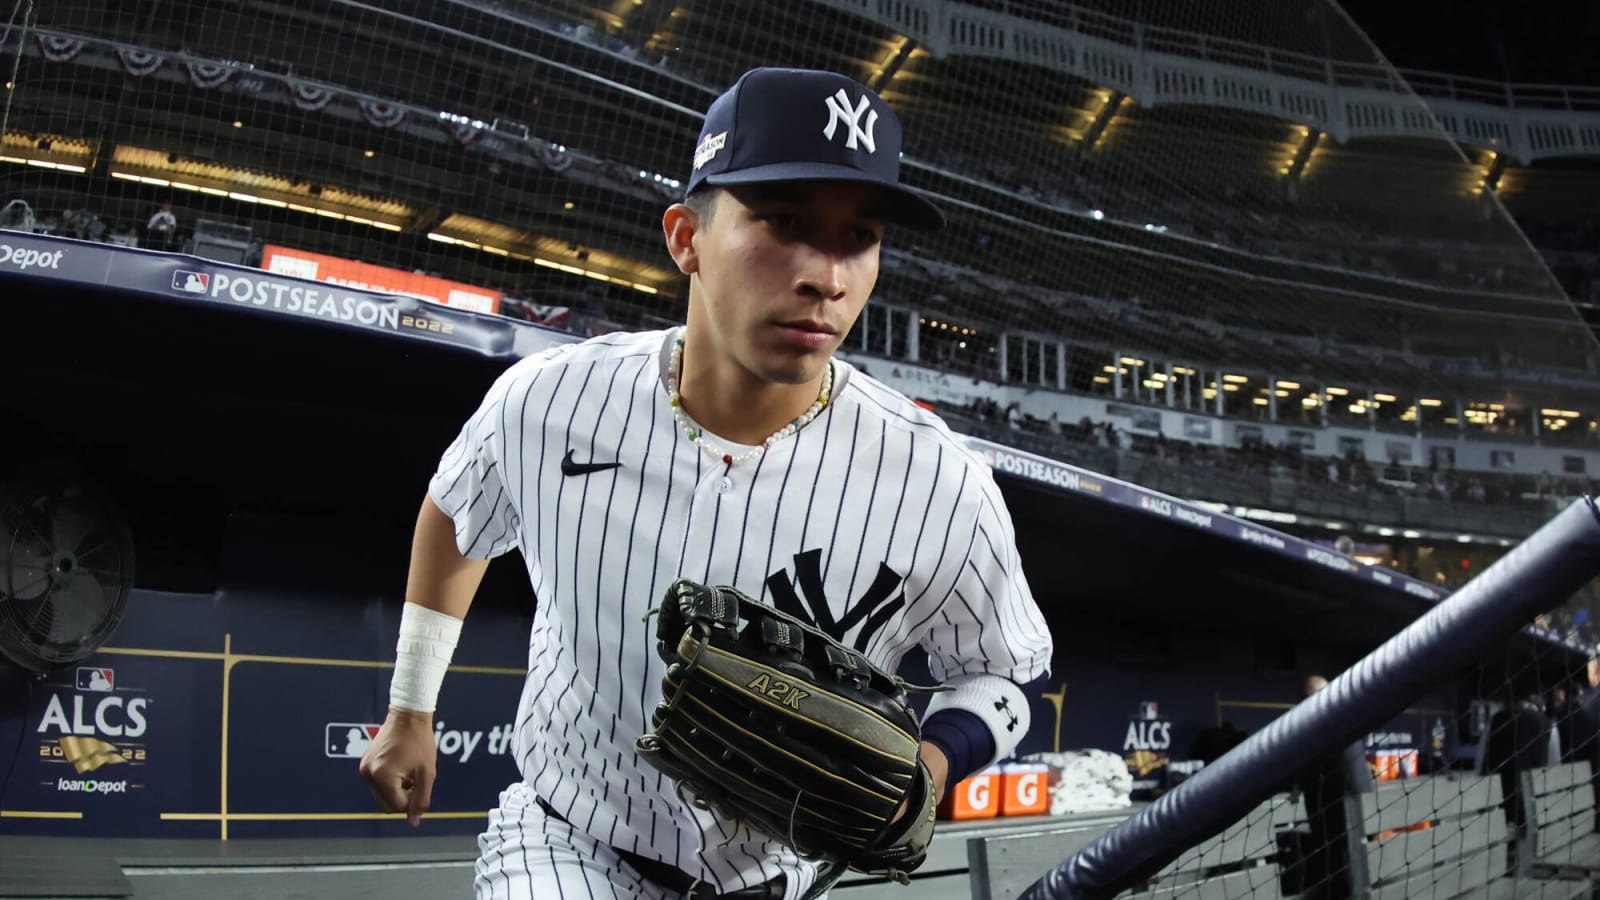 The Yankees have 3 prospects set to break out in 2023